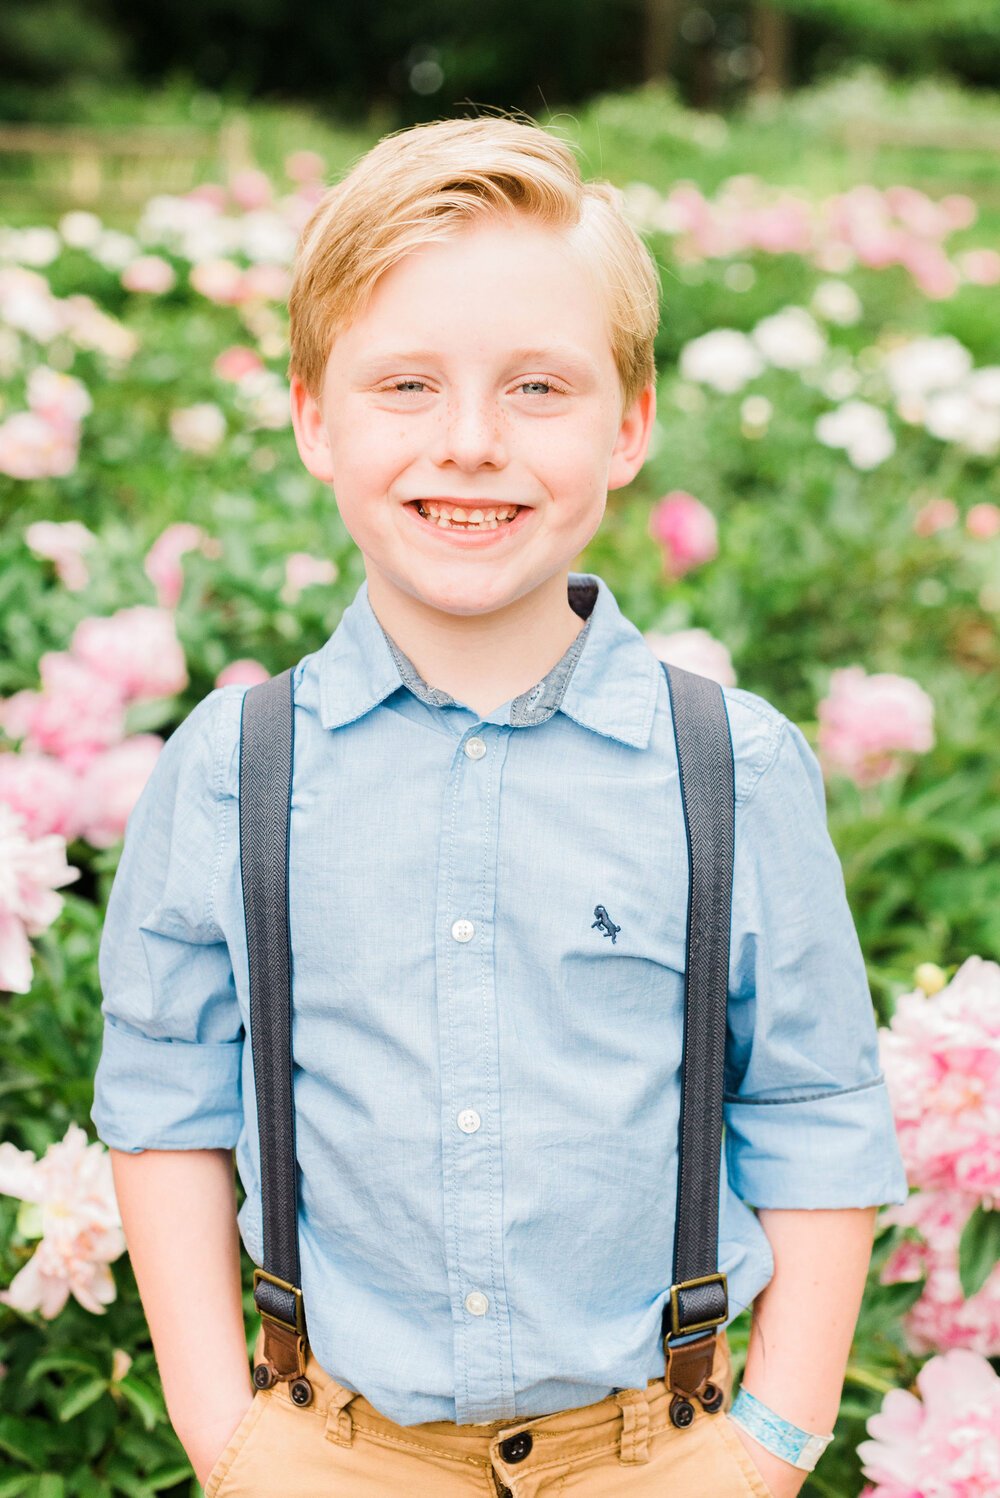  A little boy in blue suspenders smiles brightly in a portrait captured by Jacquie Erickson, an Atlanta-based photographer Marietta Sandy Springs Sharpsburg&nbsp; Roswell Children's portraits capture their childhood #childportraits #childrenphotograp